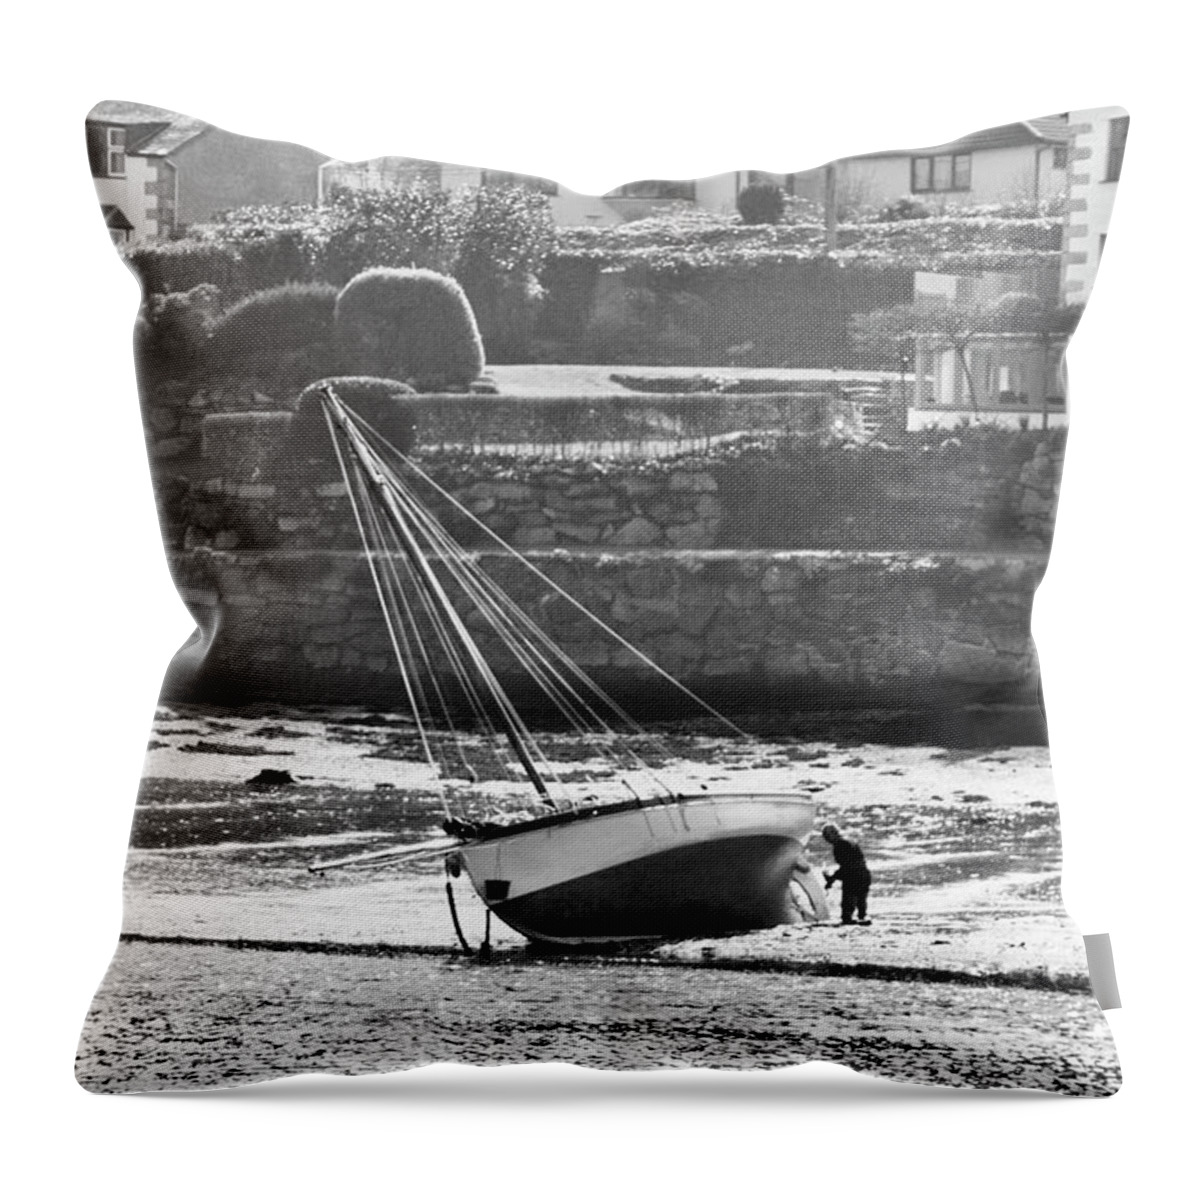 Mylor Creek Throw Pillow featuring the photograph Knee Deep In Mud by Terri Waters